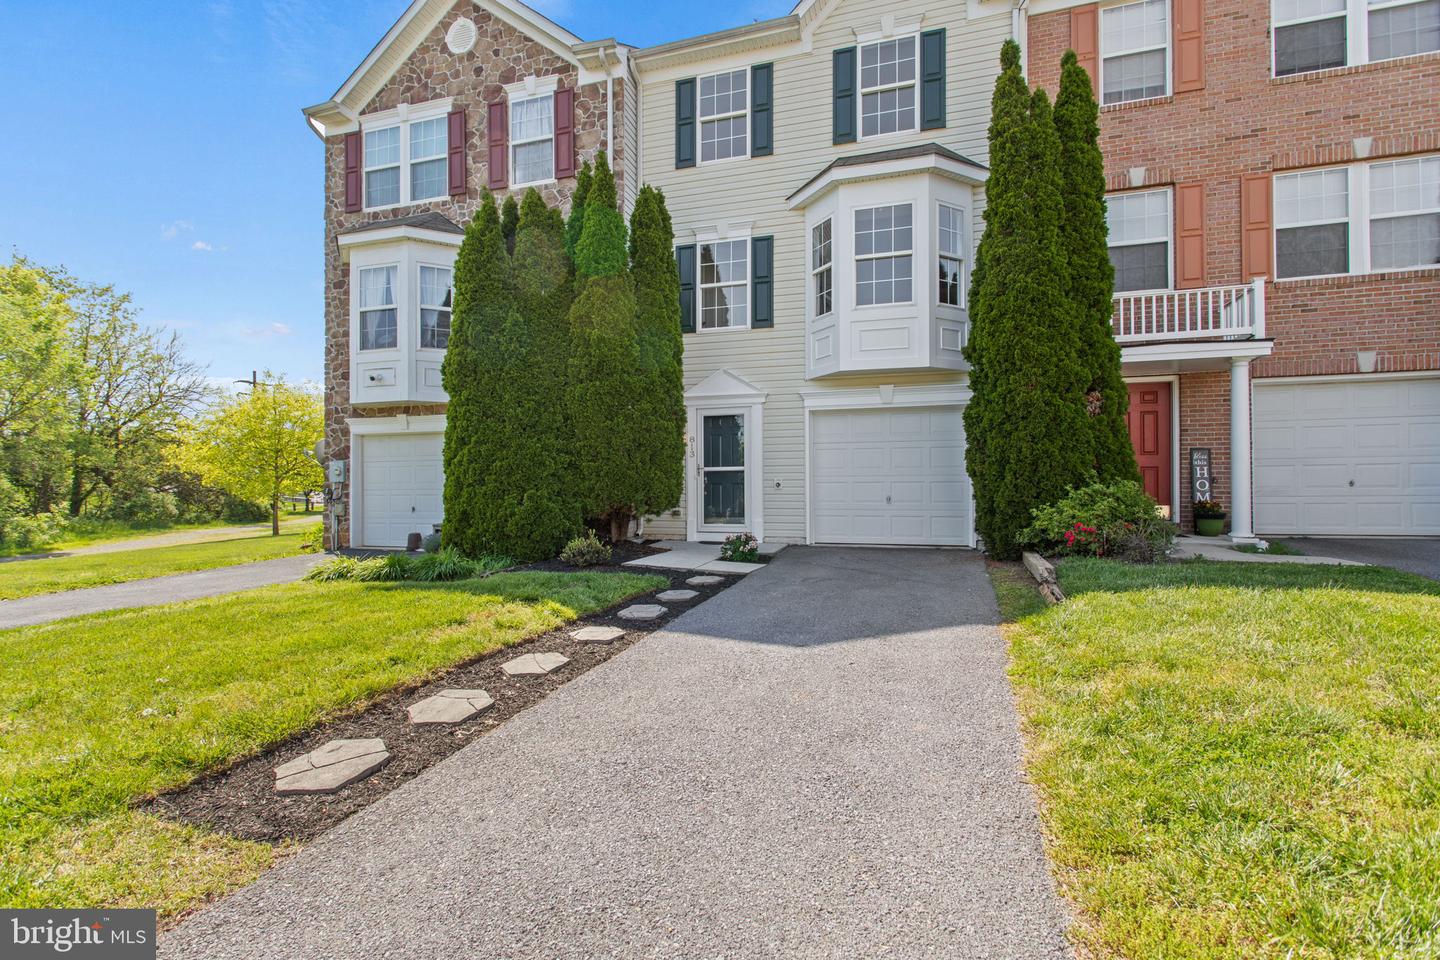 View Hagerstown, MD 21740 townhome